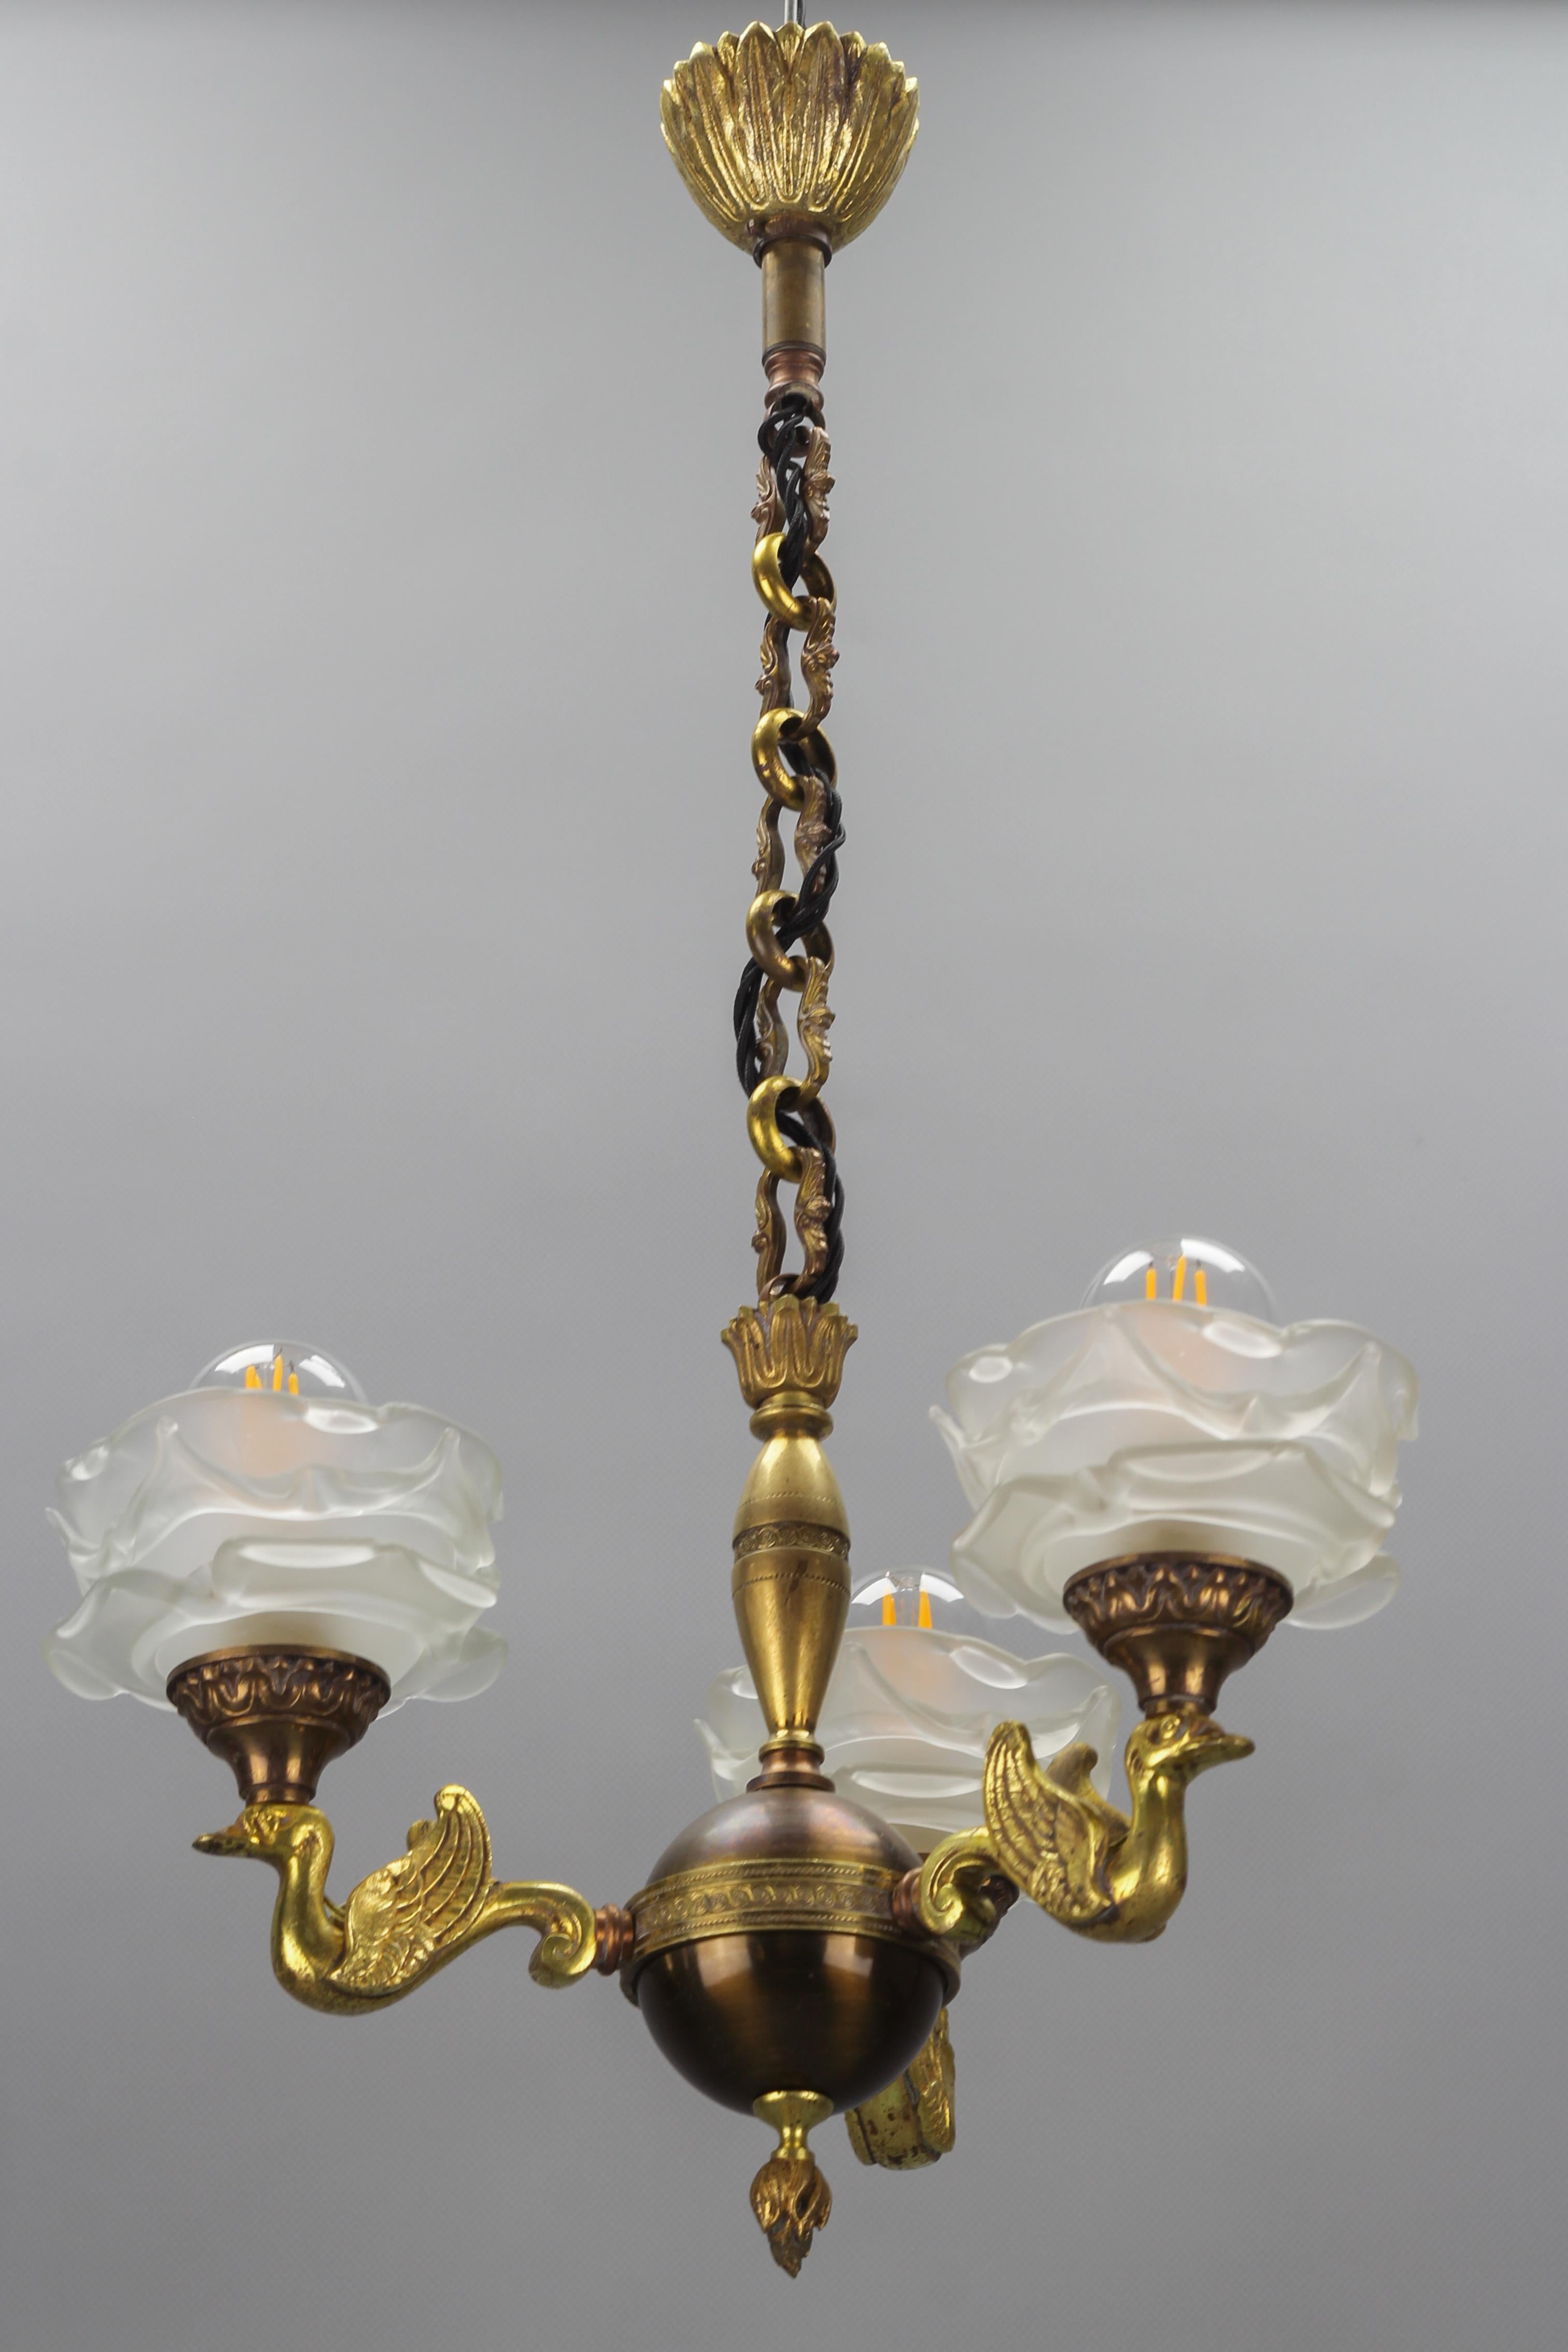 French Empire style brass, bronze, and frosted glass three-light chandelier from ca 1950s.
This adorable and compact Empire-style chandelier features a circular brass body and three arms - three bronze swans each holding a frosted glass lampshade